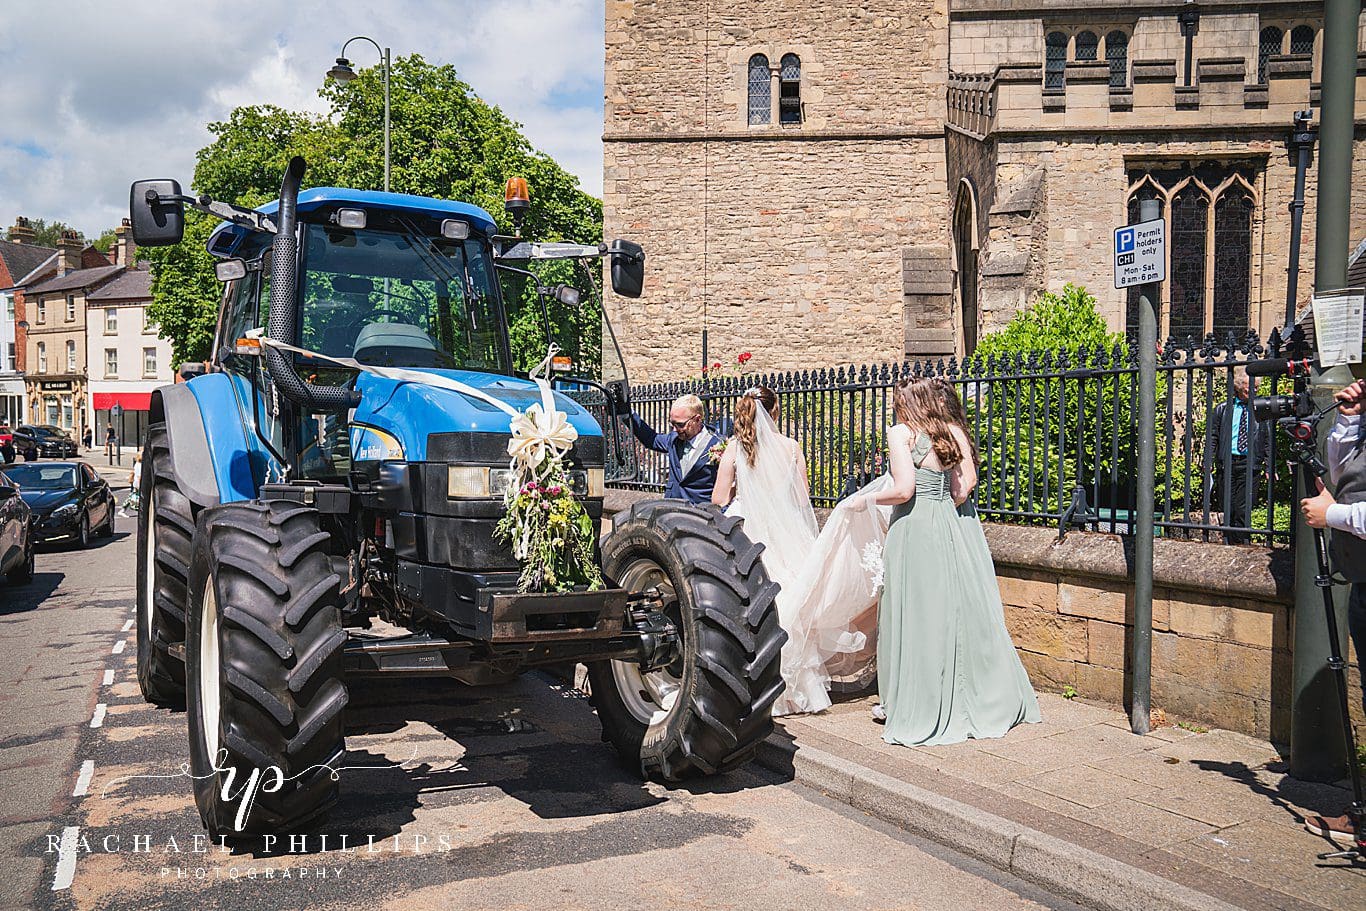 the bride and grooms transport to leave the church is a big blue tractor.